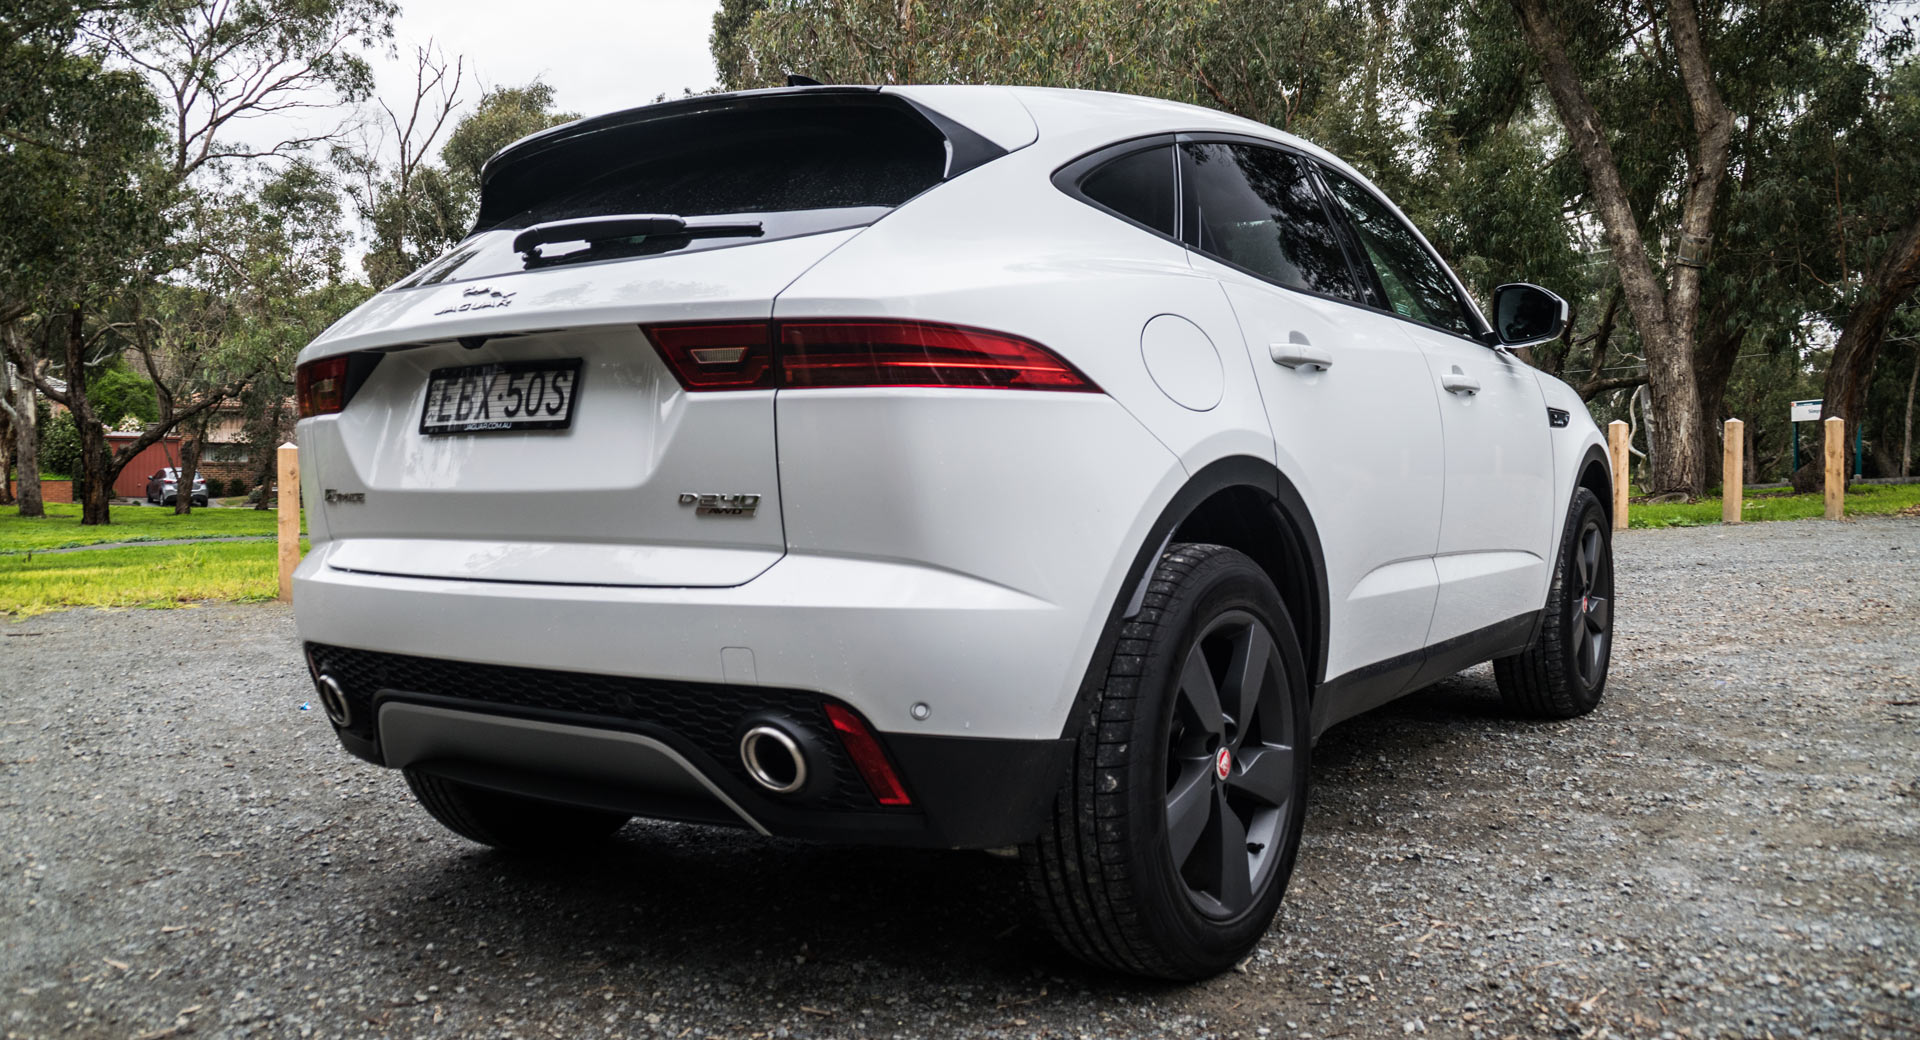 2019 Jaguar E-Pace Has Great Looks – Some Glaring Faults |